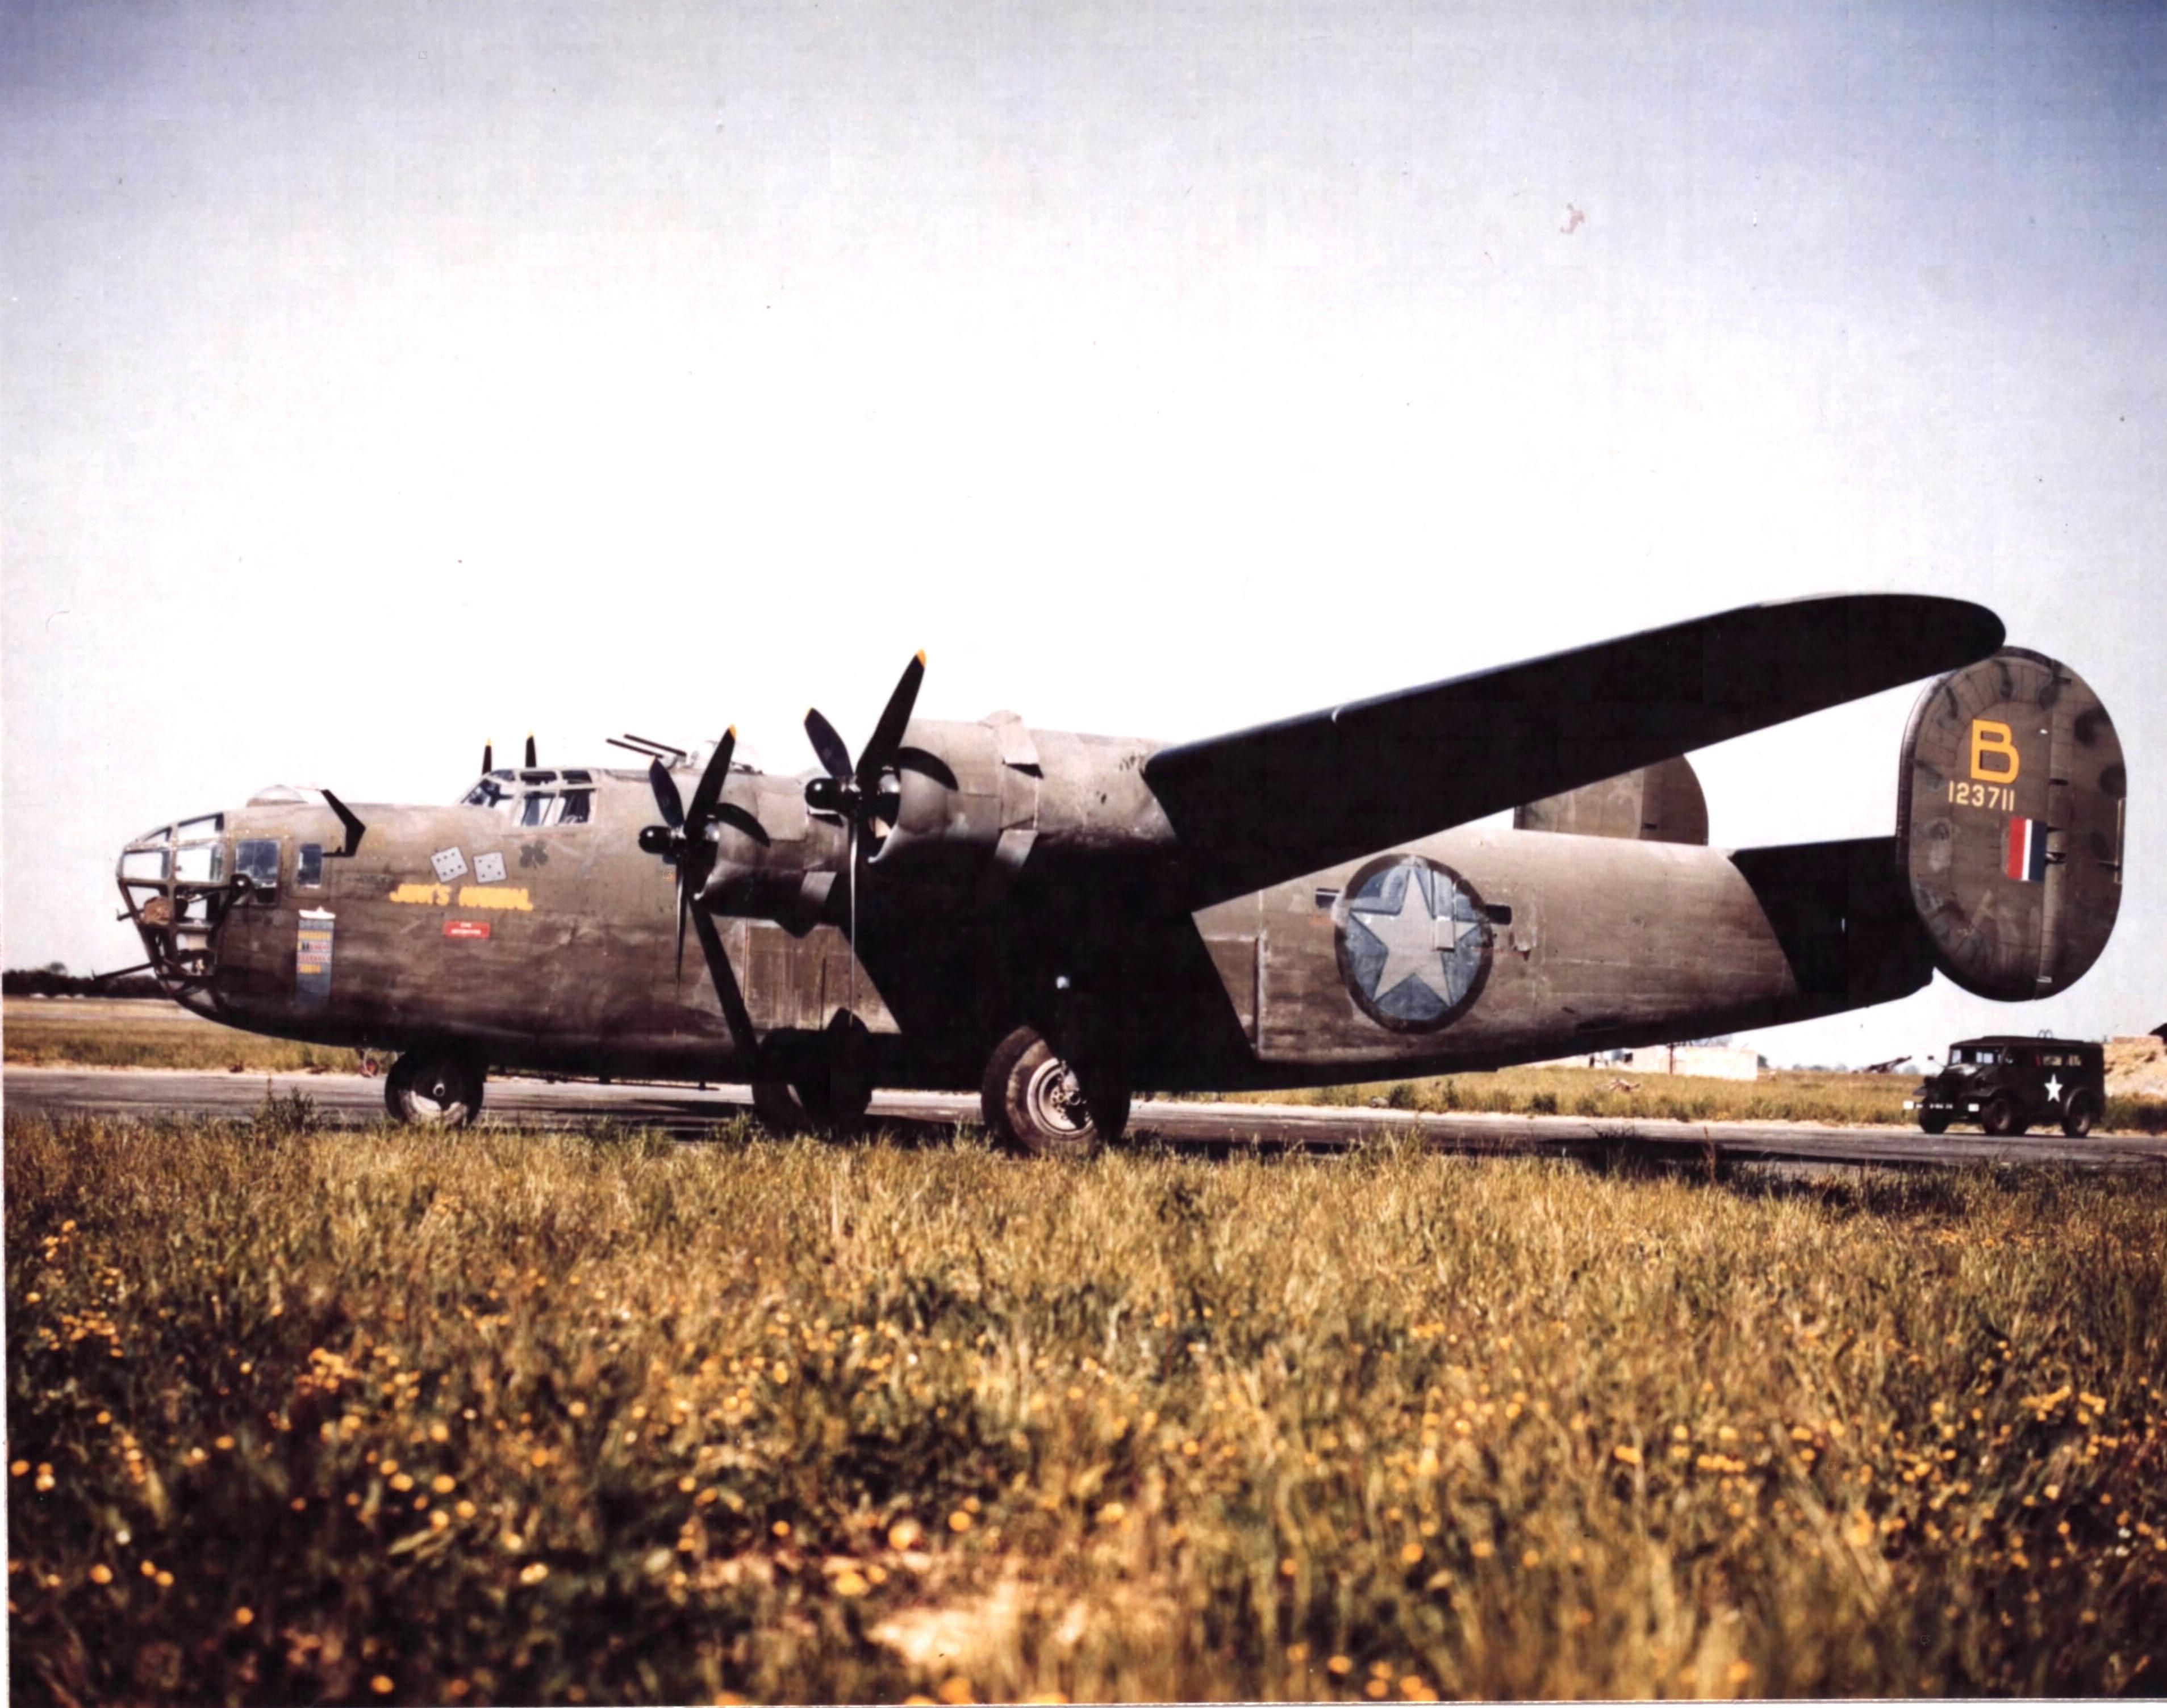 B-24D Liberator bomber 'Jerks Natural' of 93rd Bomber Group, US 328th Bomber Squadron at an airfield at Gambut Airfield (now Kambut), Libya, Feb 1943